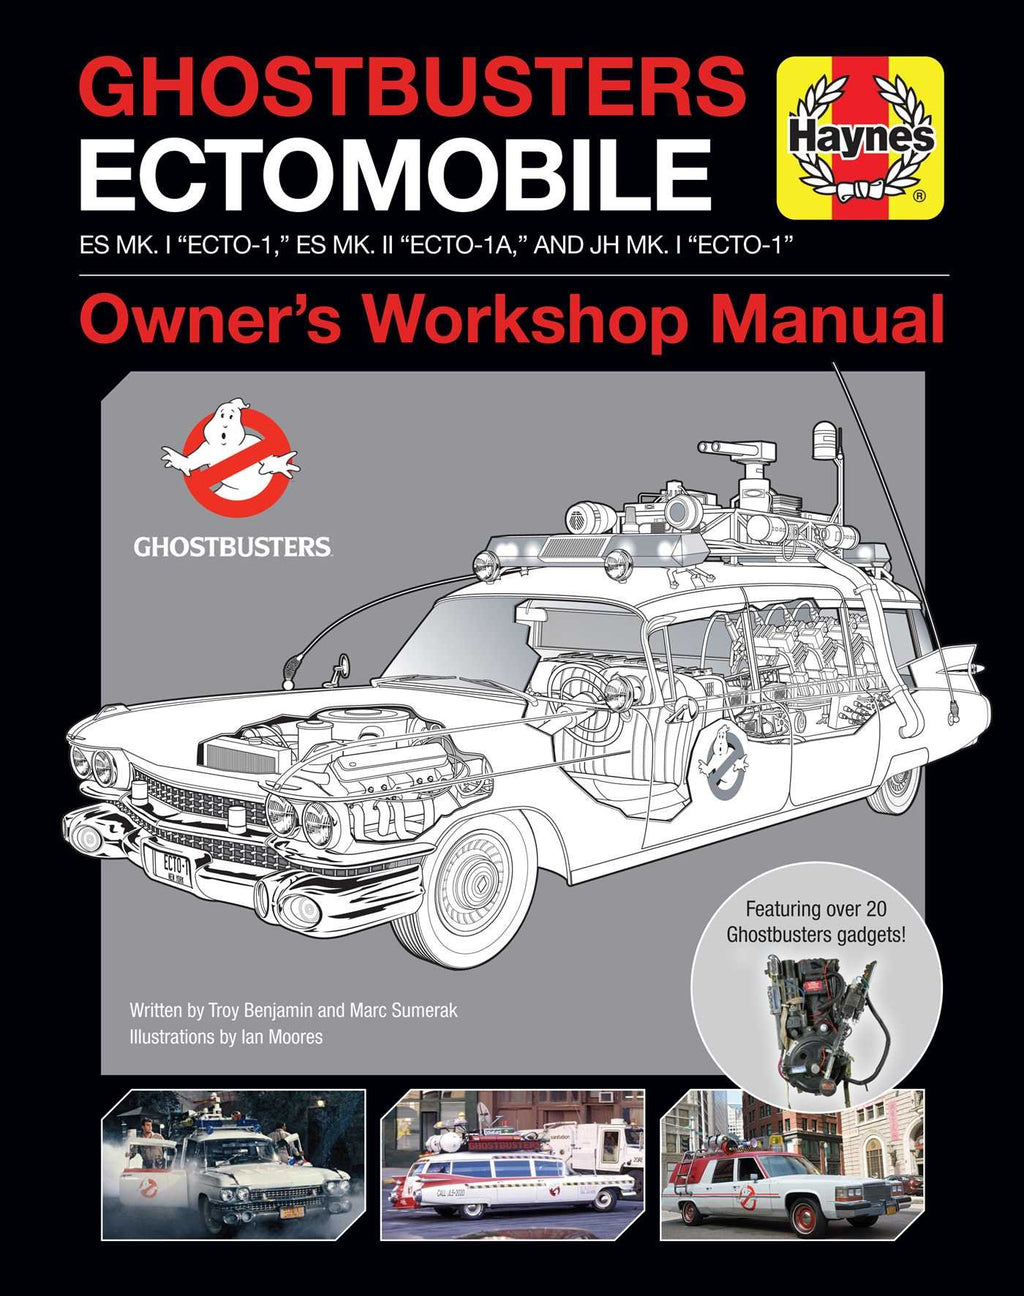 Ghostbusters Ectomobile Owner's Workshop Manual - The Comic Warehouse